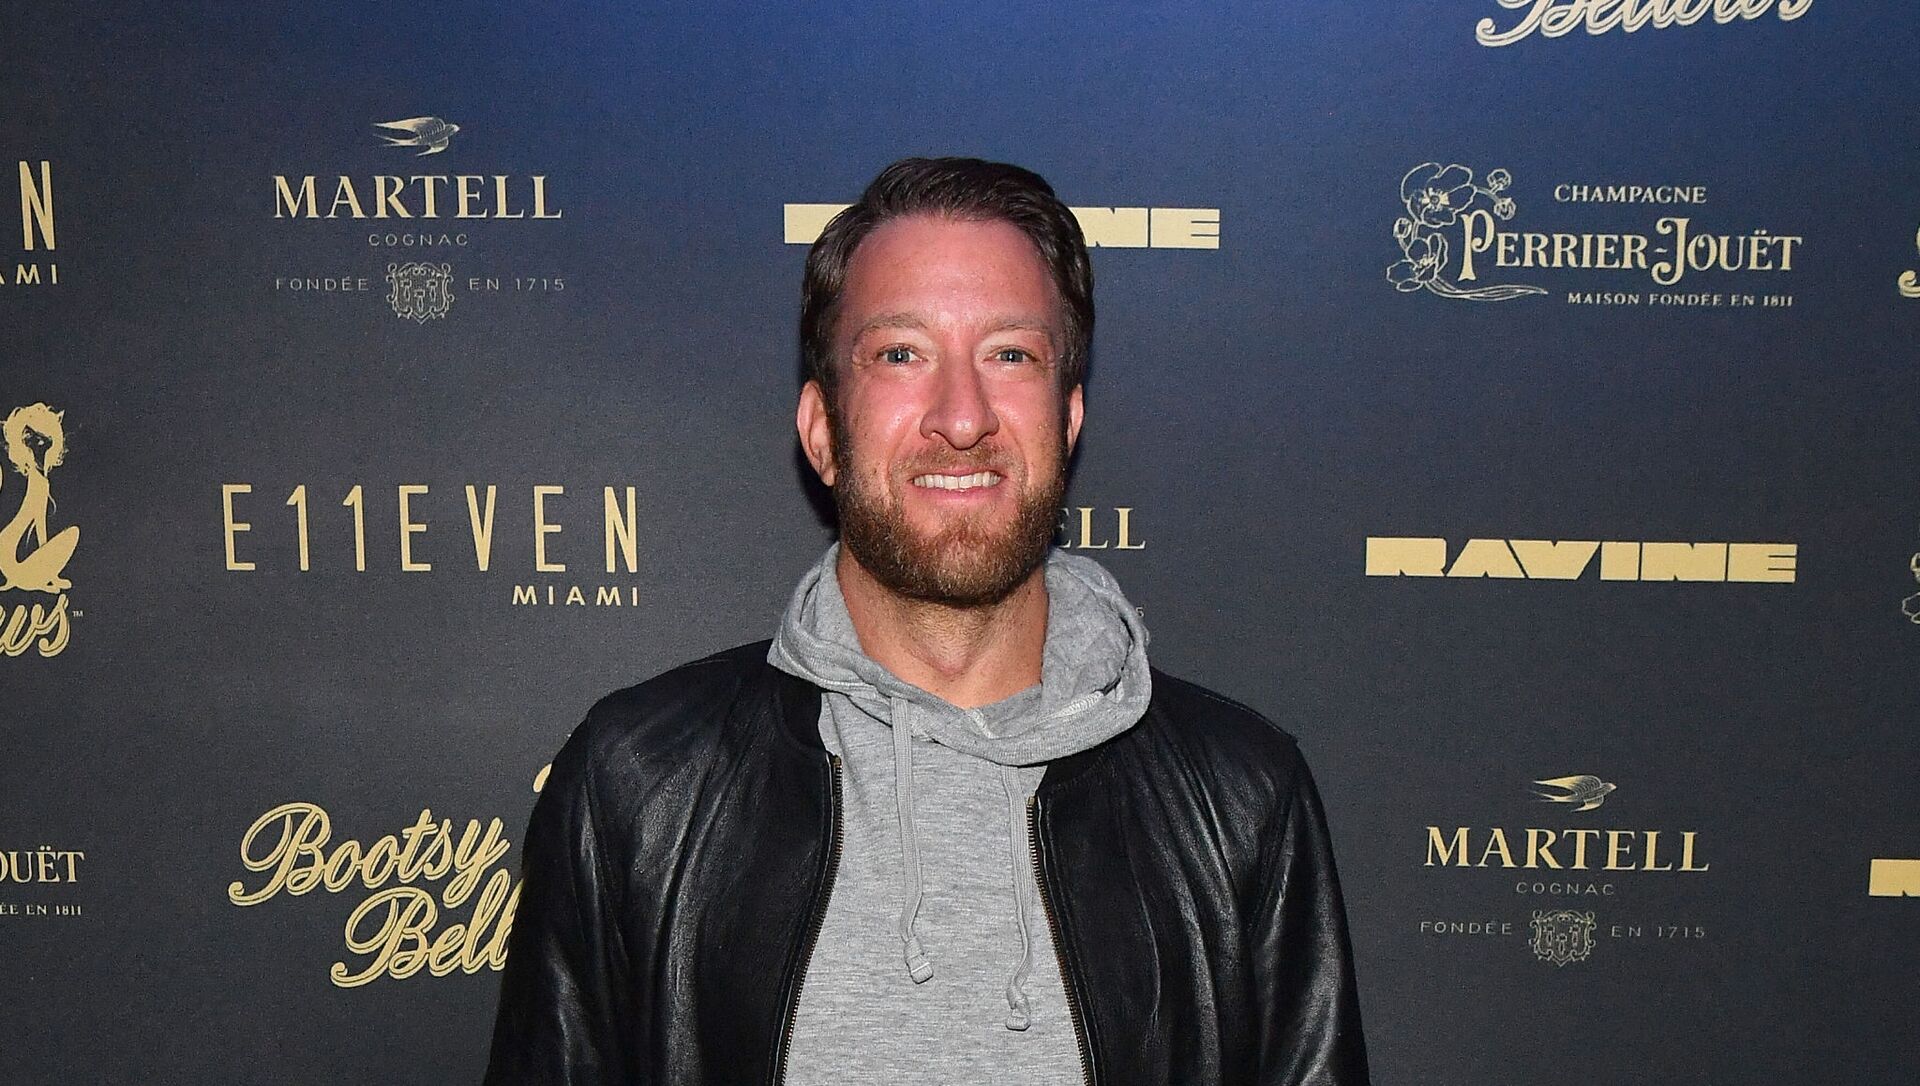 Dave Portnoy attends Tiesto Performs At Bootsy Bellows x E11EVEN Miami 2019 BIG GAME WEEKEND EXPERIENCE at RavineATL on February 01, 2019 in Atlanta, Georgia.   - Sputnik International, 1920, 25.06.2021